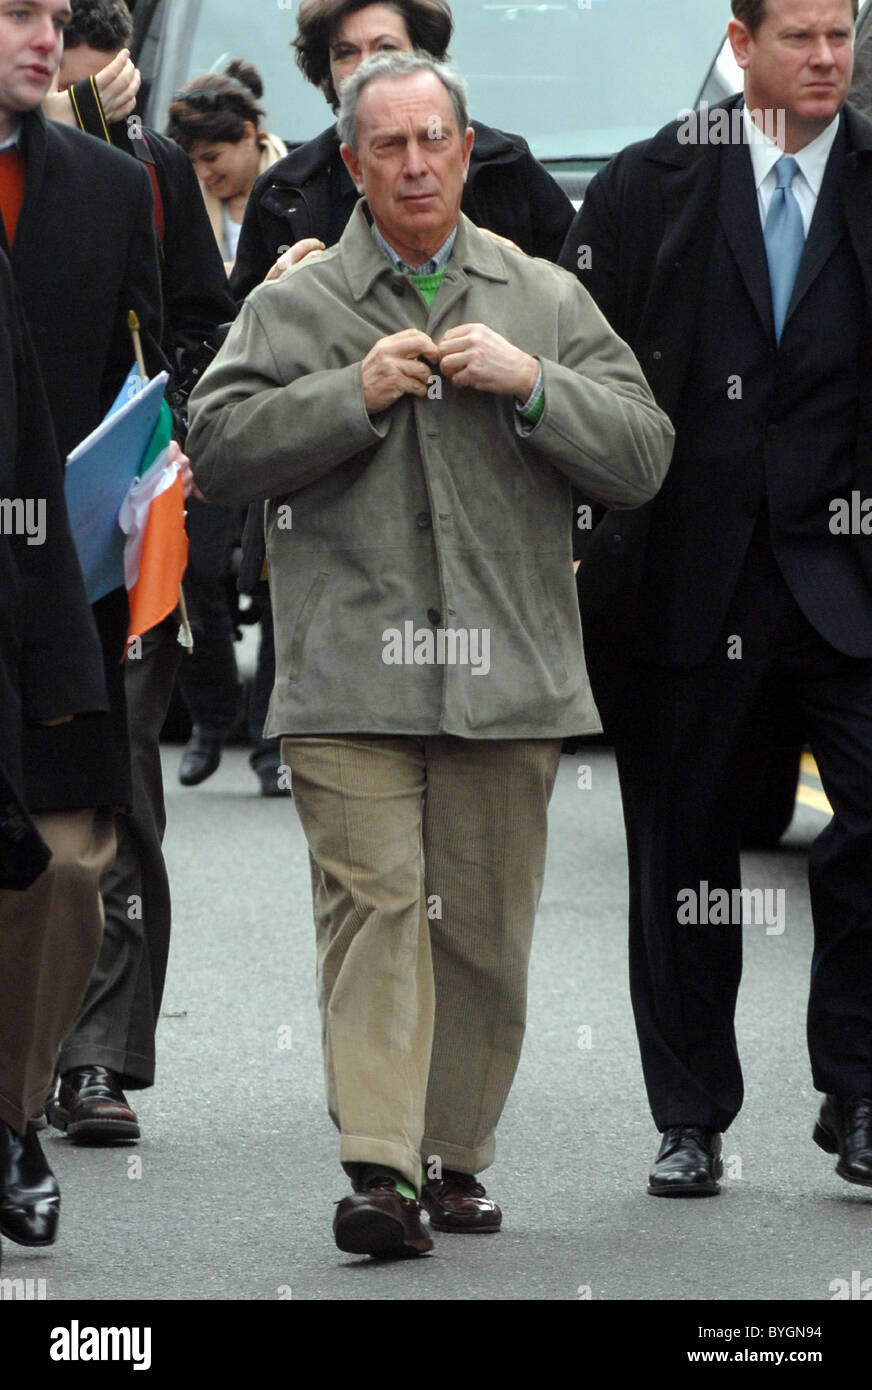 Mayor Bloomberg  St. Patrick's Day for All Parade in Sunnyside, Queens. New York City, USA - 04.03.07 Stock Photo